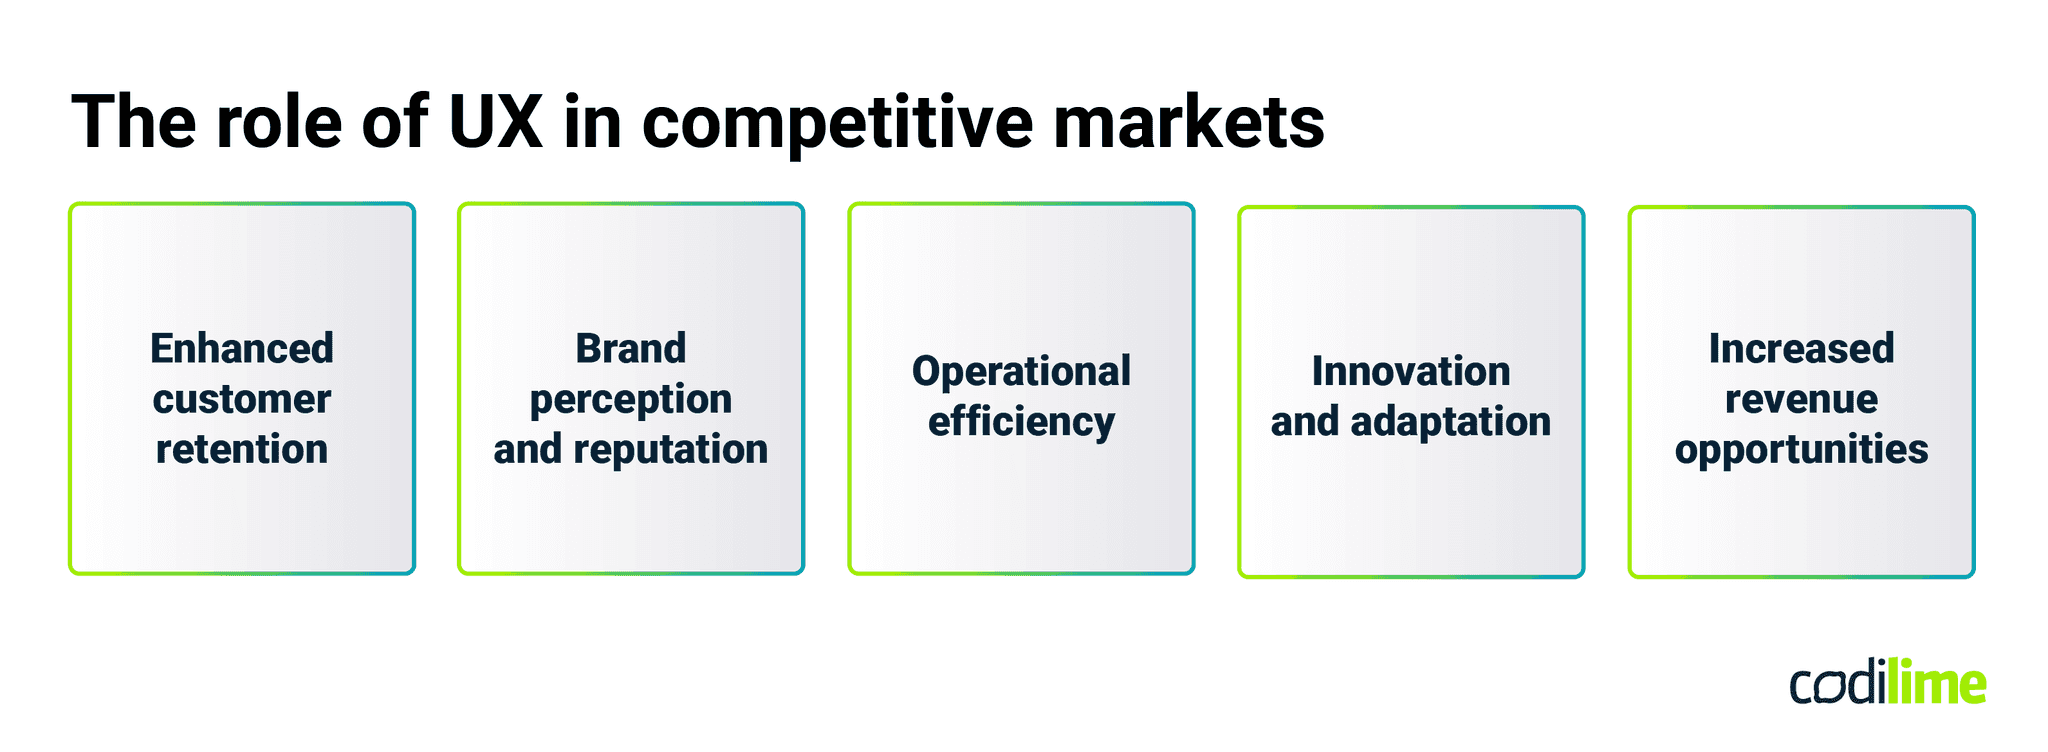 The role of UX in competitive markets